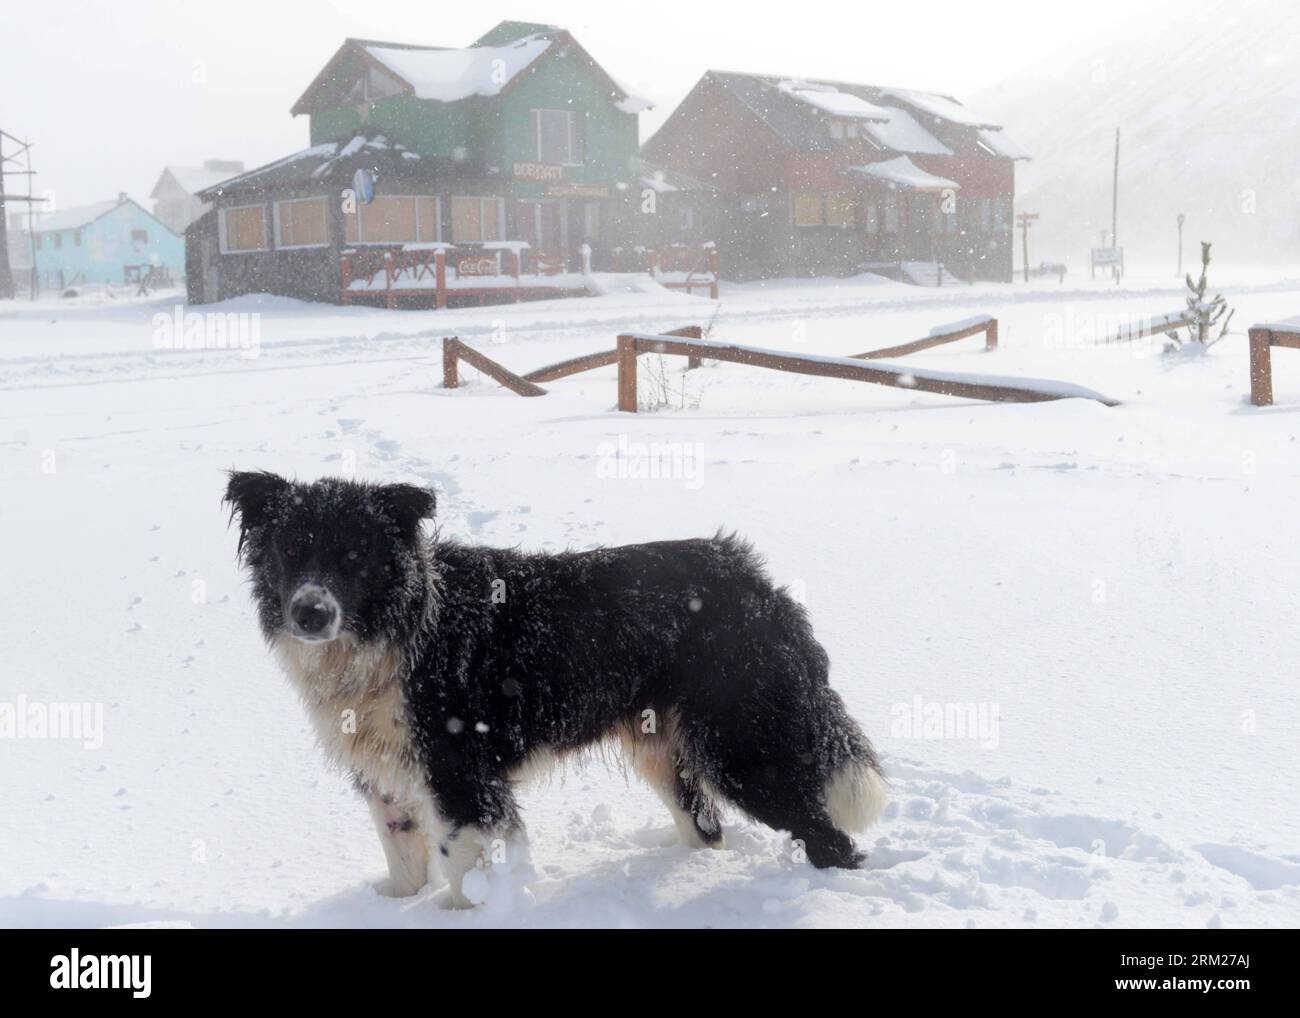 Bildnummer: 59723015  Datum: 28.05.2013  Copyright: imago/Xinhua (130529) -- NEUQUEN, May 28, 2013 (Xinhua) -- A dog is seen on snow in the rural area of Caviahue, close to Copahue volcano, which is on maximum alert of possible eruption, at the border locality of Caviahue-Copahue, in the Neuquen province, Argentina, May 28, 2013. Chilean and Argentine authorities declared red alert on an eventual eruption, and evacuation started on both sides. (Xinhua/Pepe Delloro/TELAM) ARGENTINA-NEUQUEN-ENVIRONMENT-VOLCANO PUBLICATIONxNOTxINxCHN xcb x0x 2013 quer     59723015 Date 28 05 2013 Copyright Imago Stock Photo